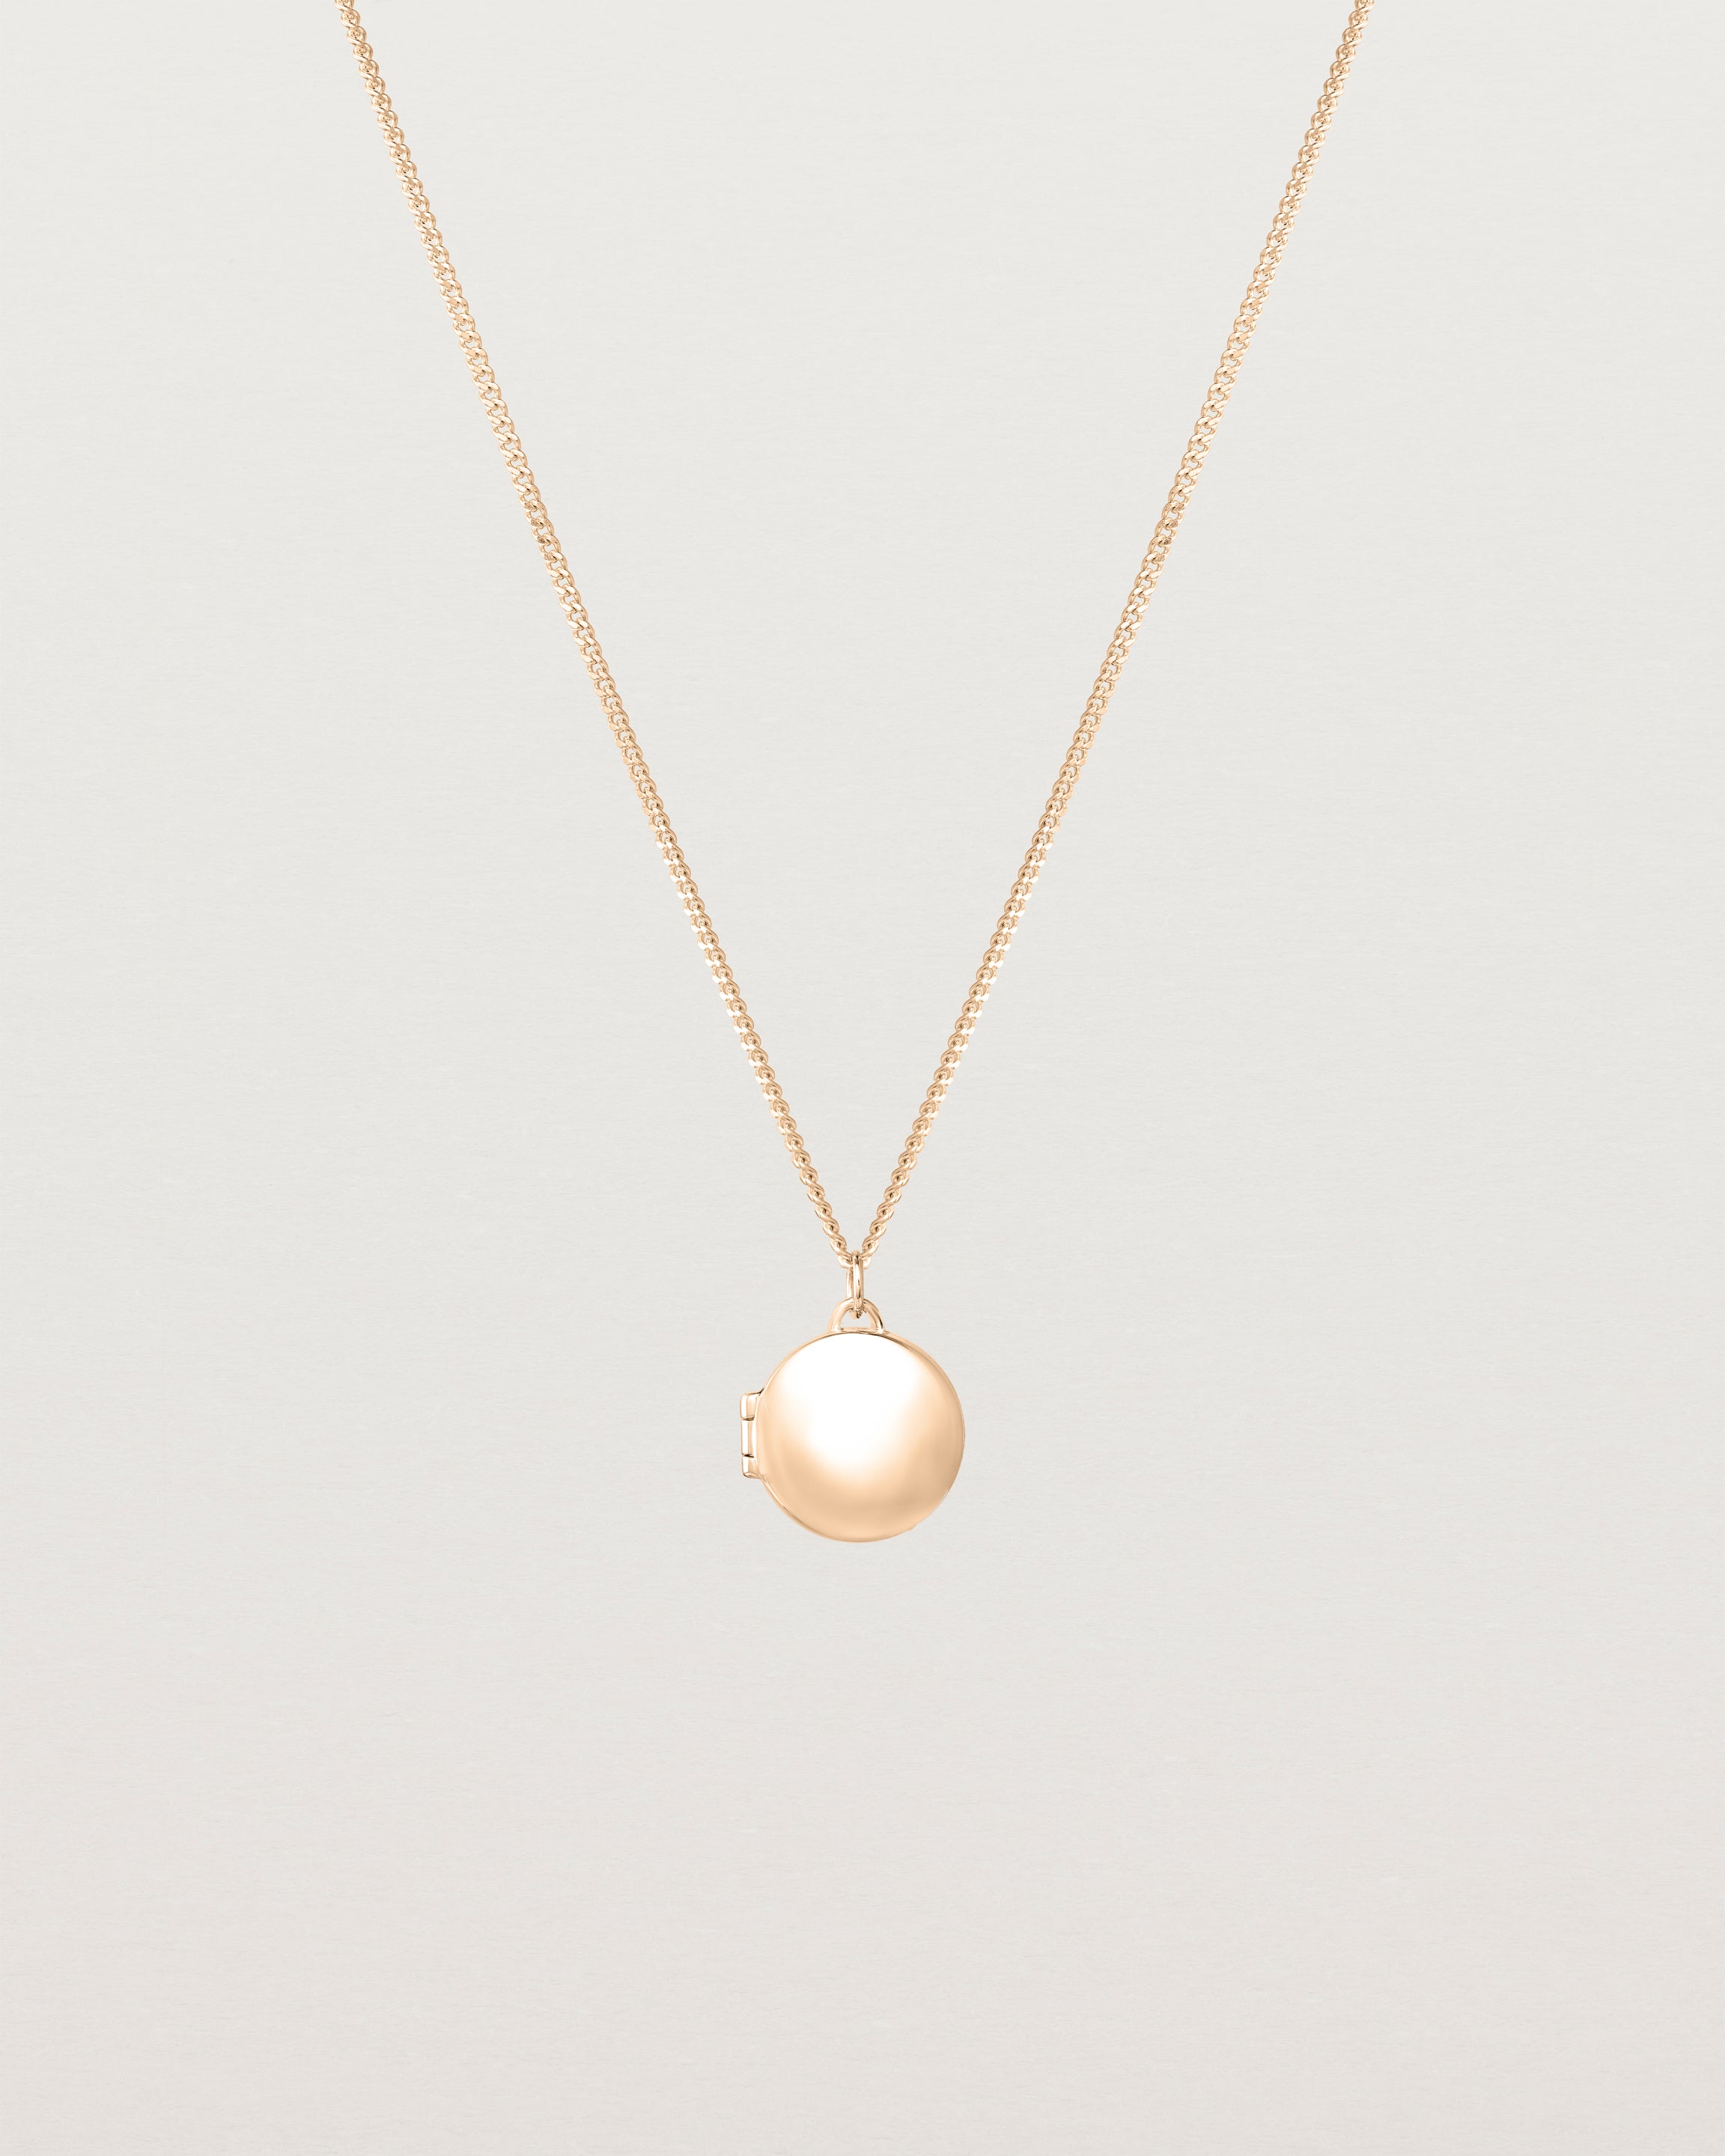 Front view of the Signature Locket in rose gold.